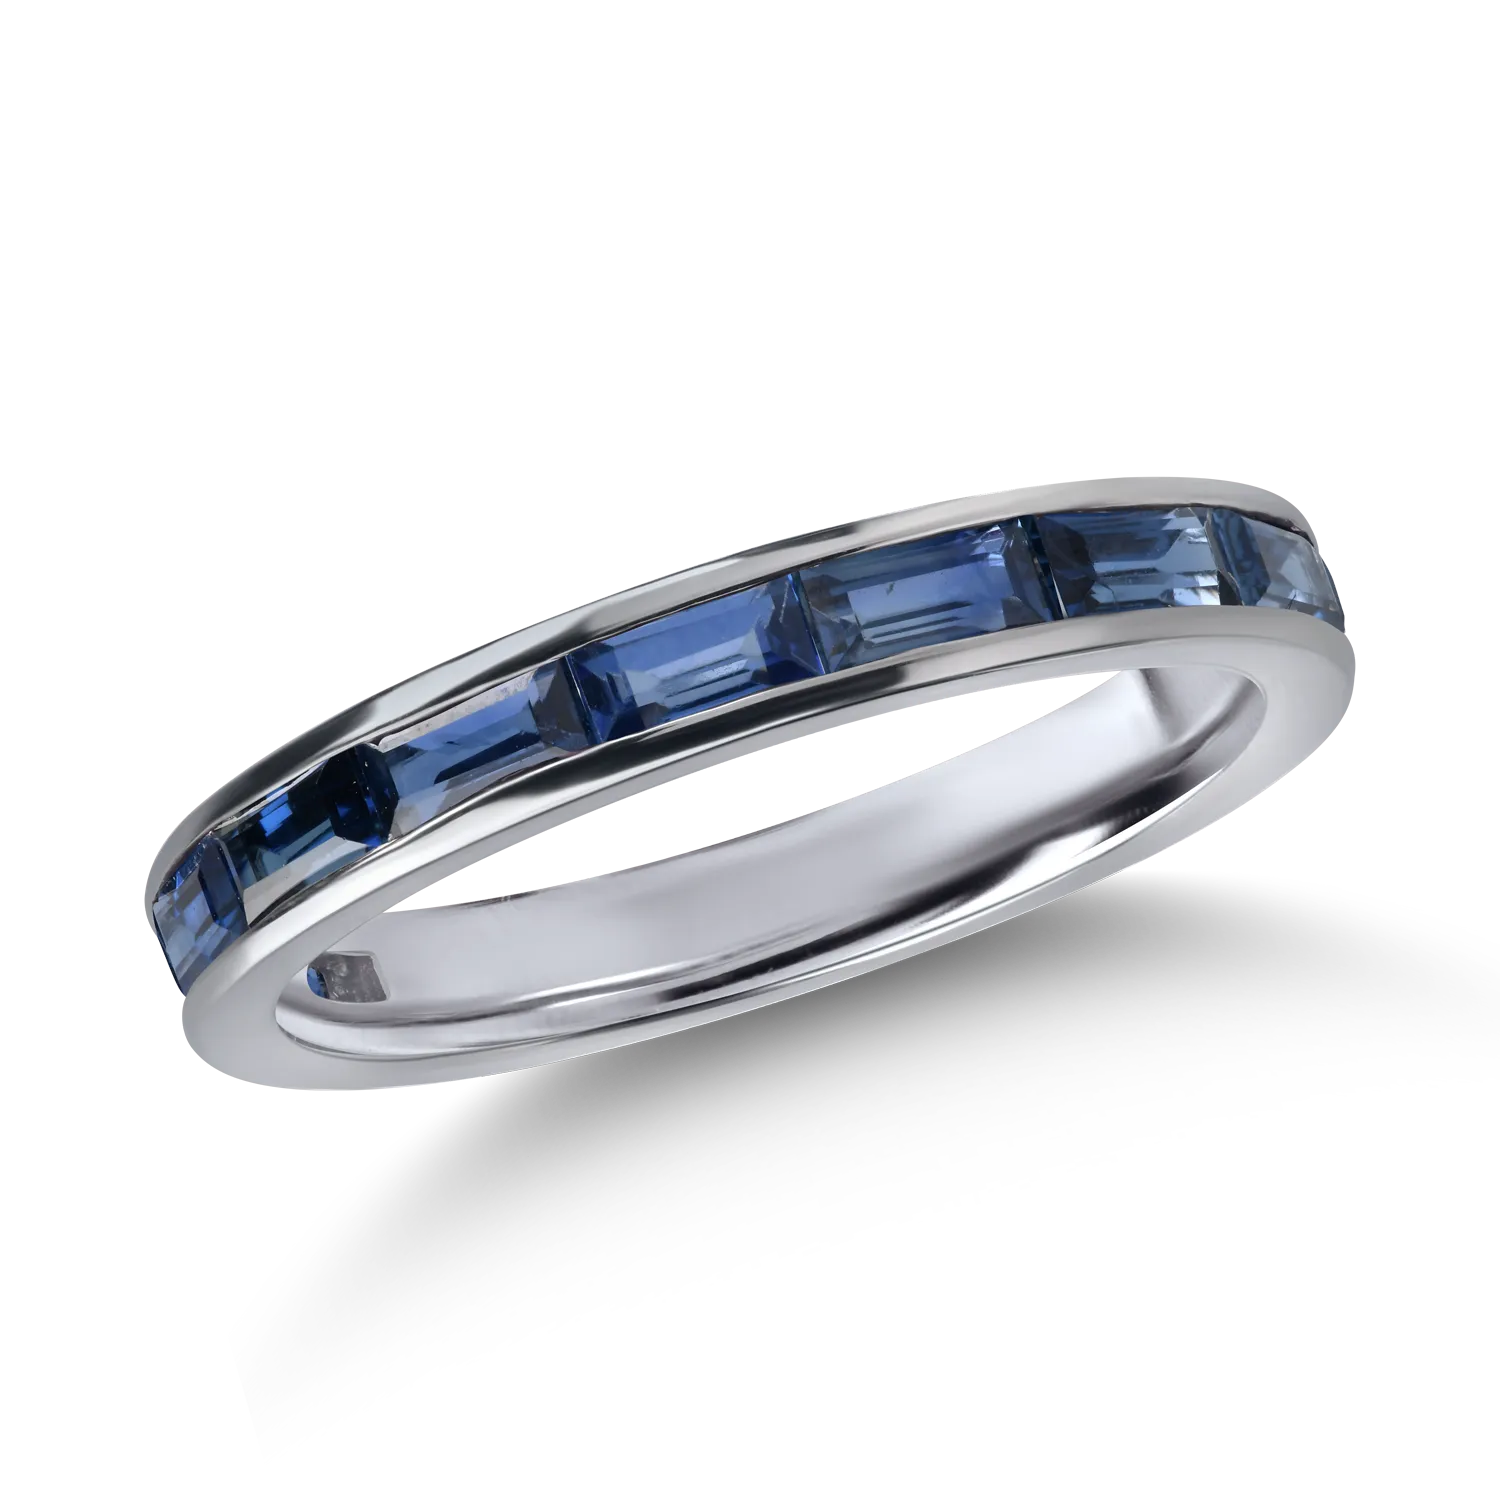 Half eternity ring in white gold with 1.65ct sapphires